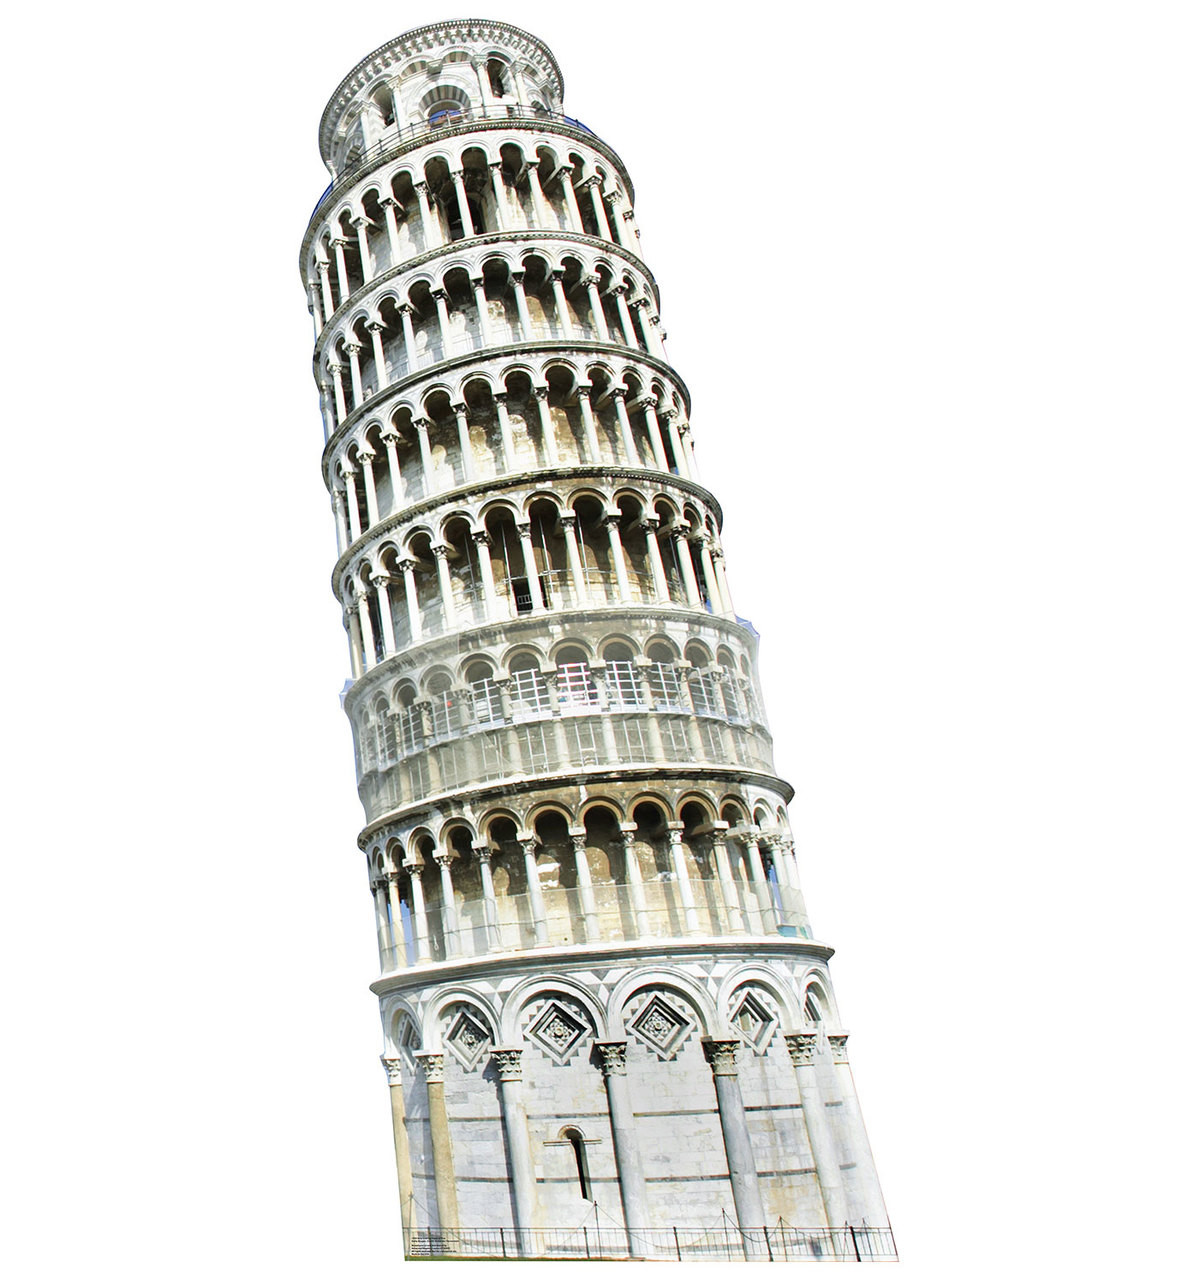 Life-size Italy Leaning Tower of Pisa Cardboard Standup